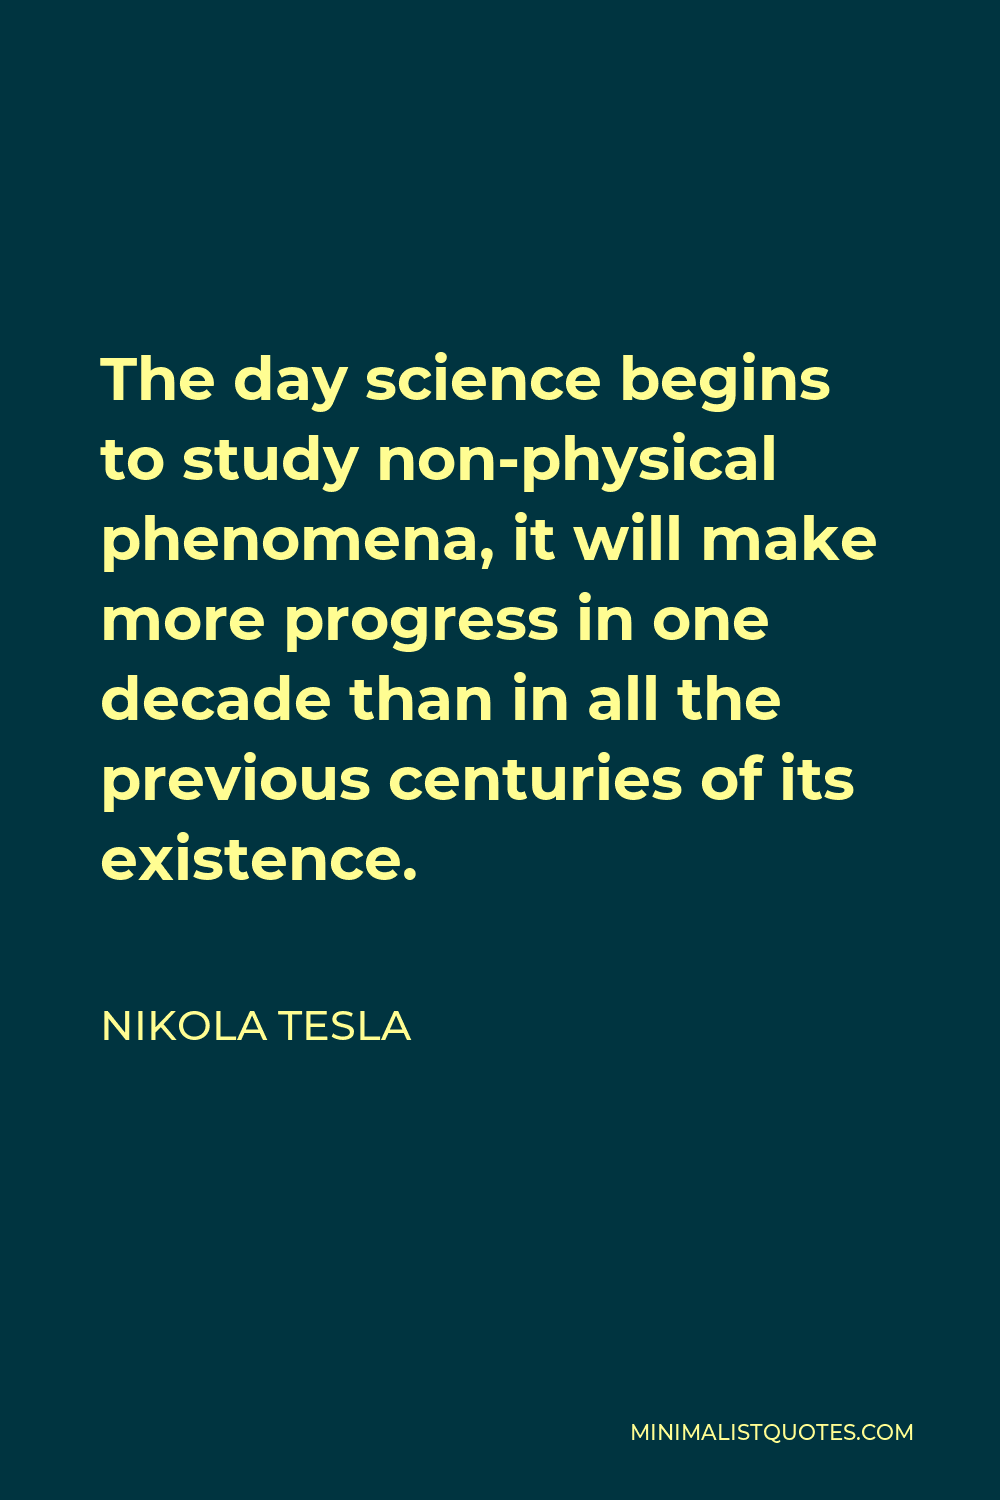 Nikola Tesla Quote - The day science begins to study non-physical phenomena, it will make more progress in one decade than in all the previous centuries of its existence.